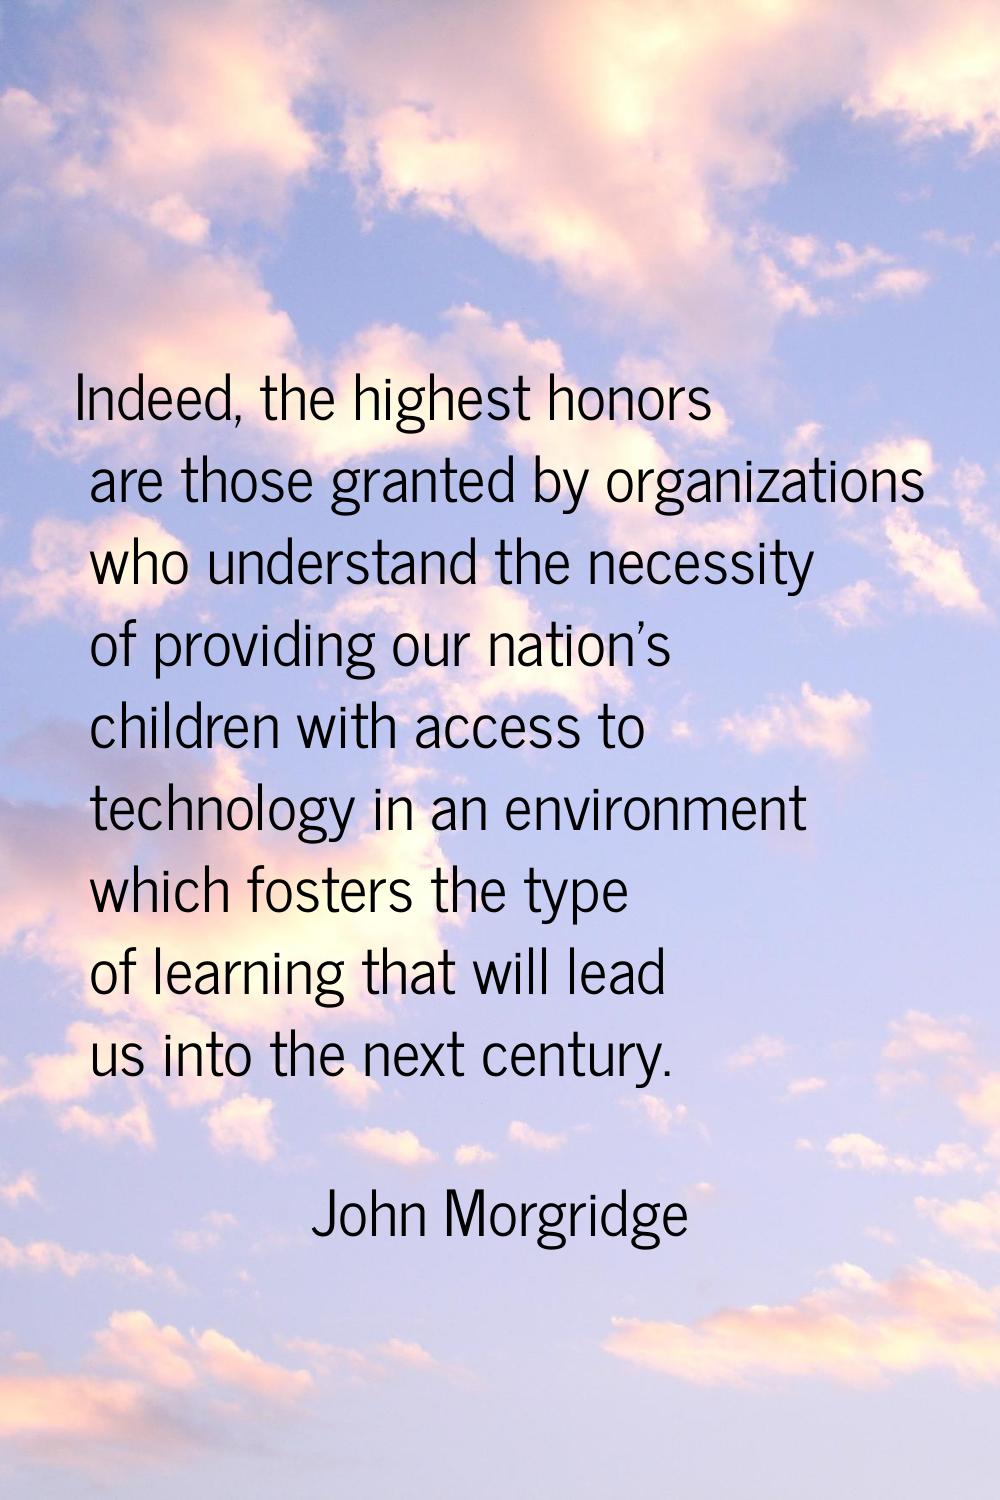 Indeed, the highest honors are those granted by organizations who understand the necessity of provi